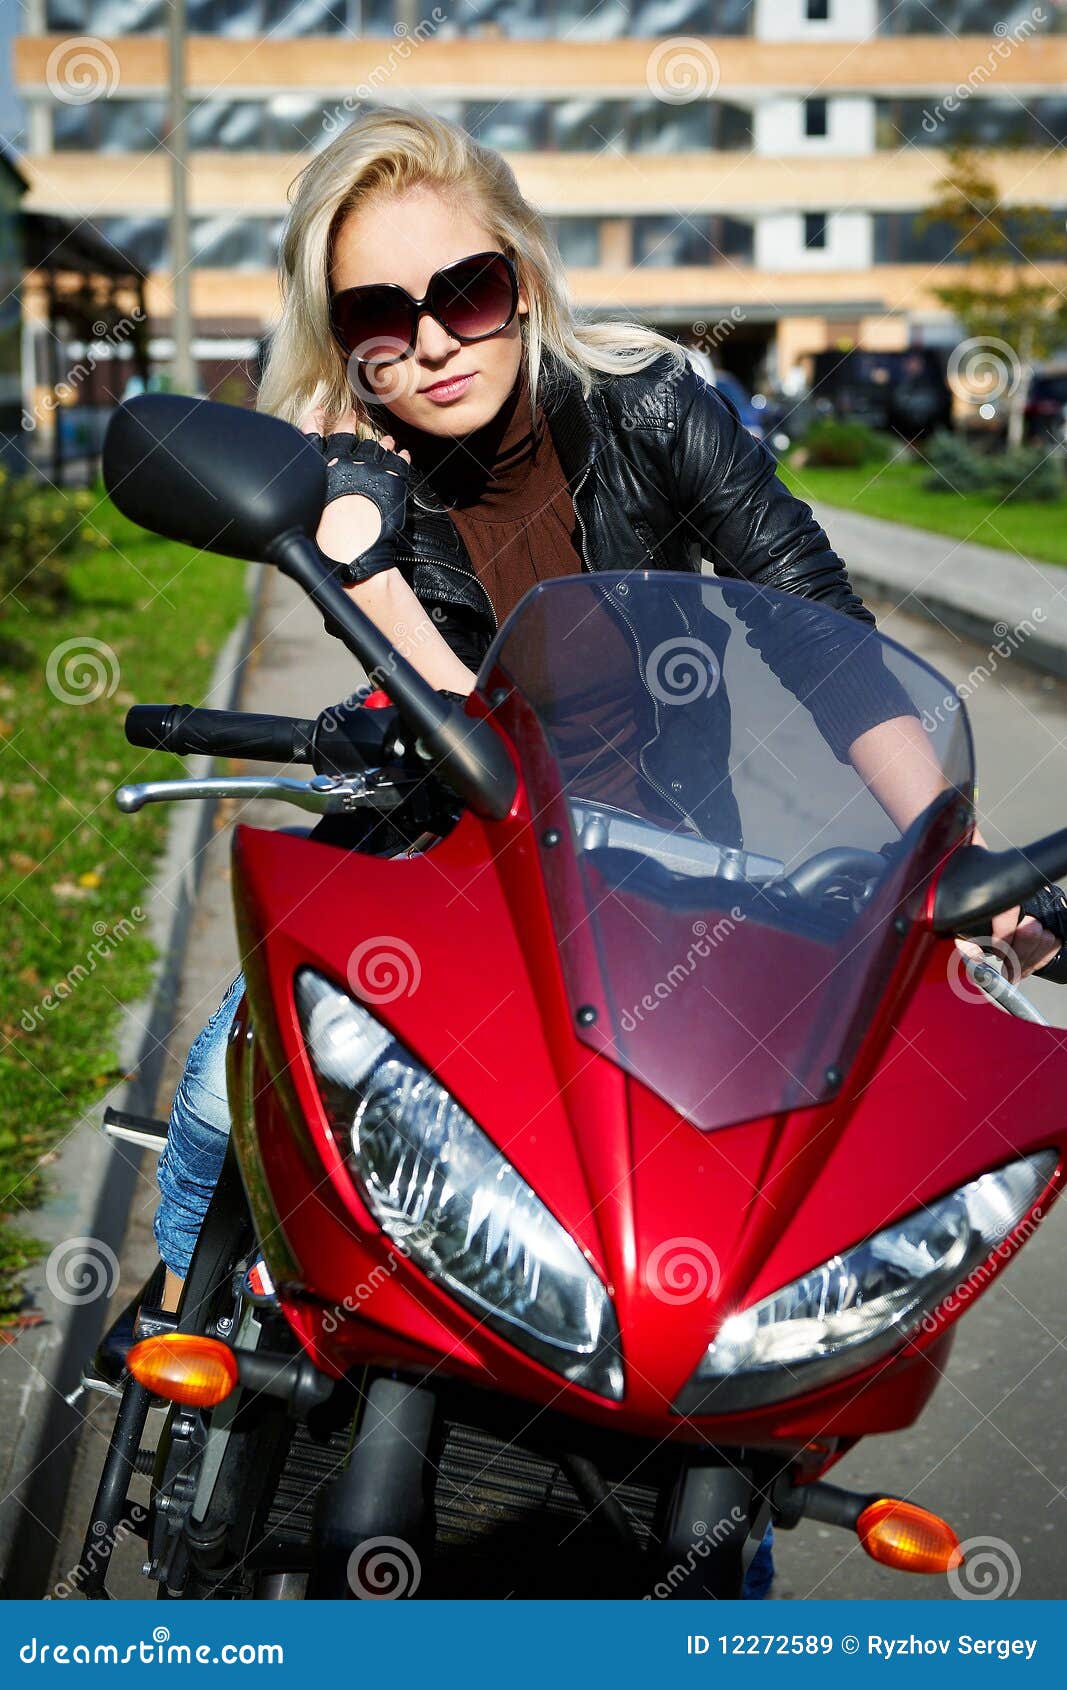 The Girl Blonde Sg On Red Motorcycle Royalty Free Stock -9236